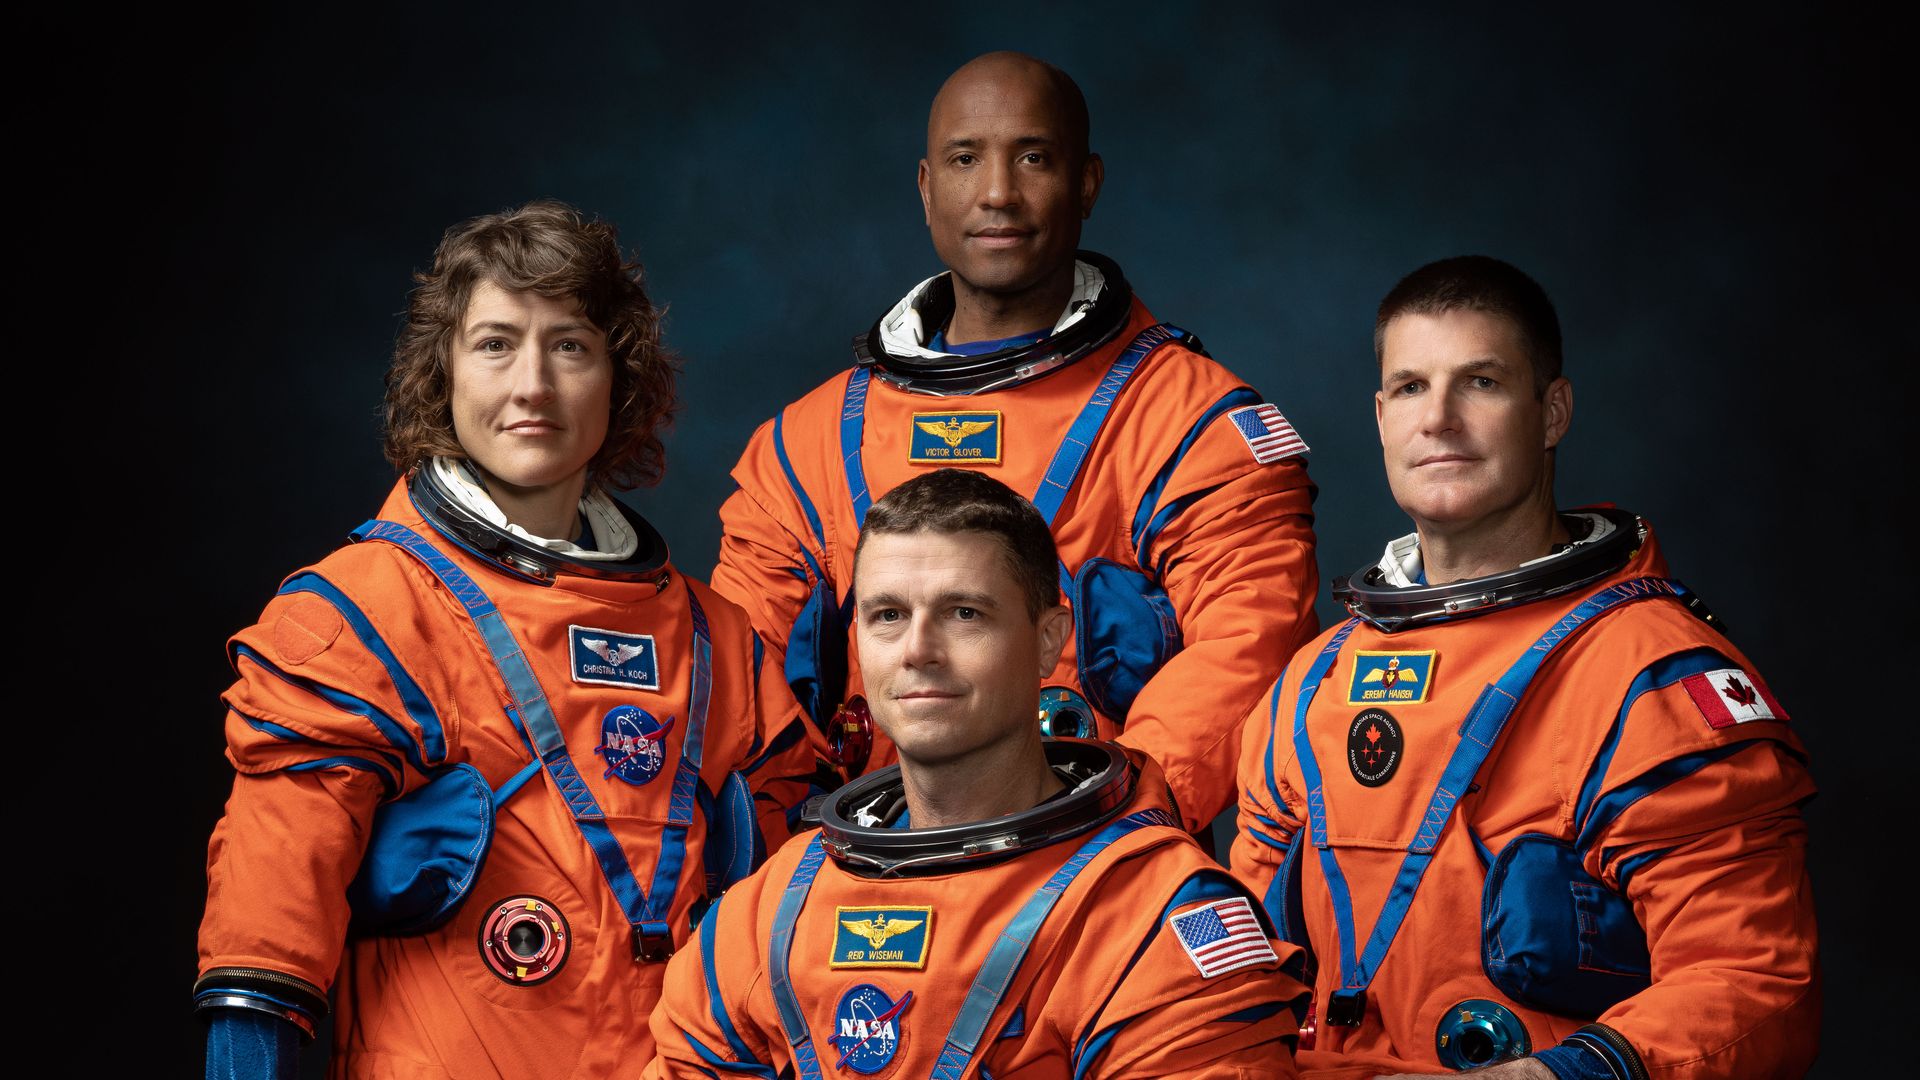 Four astronauts pose in their orange spacesuits with helmets off